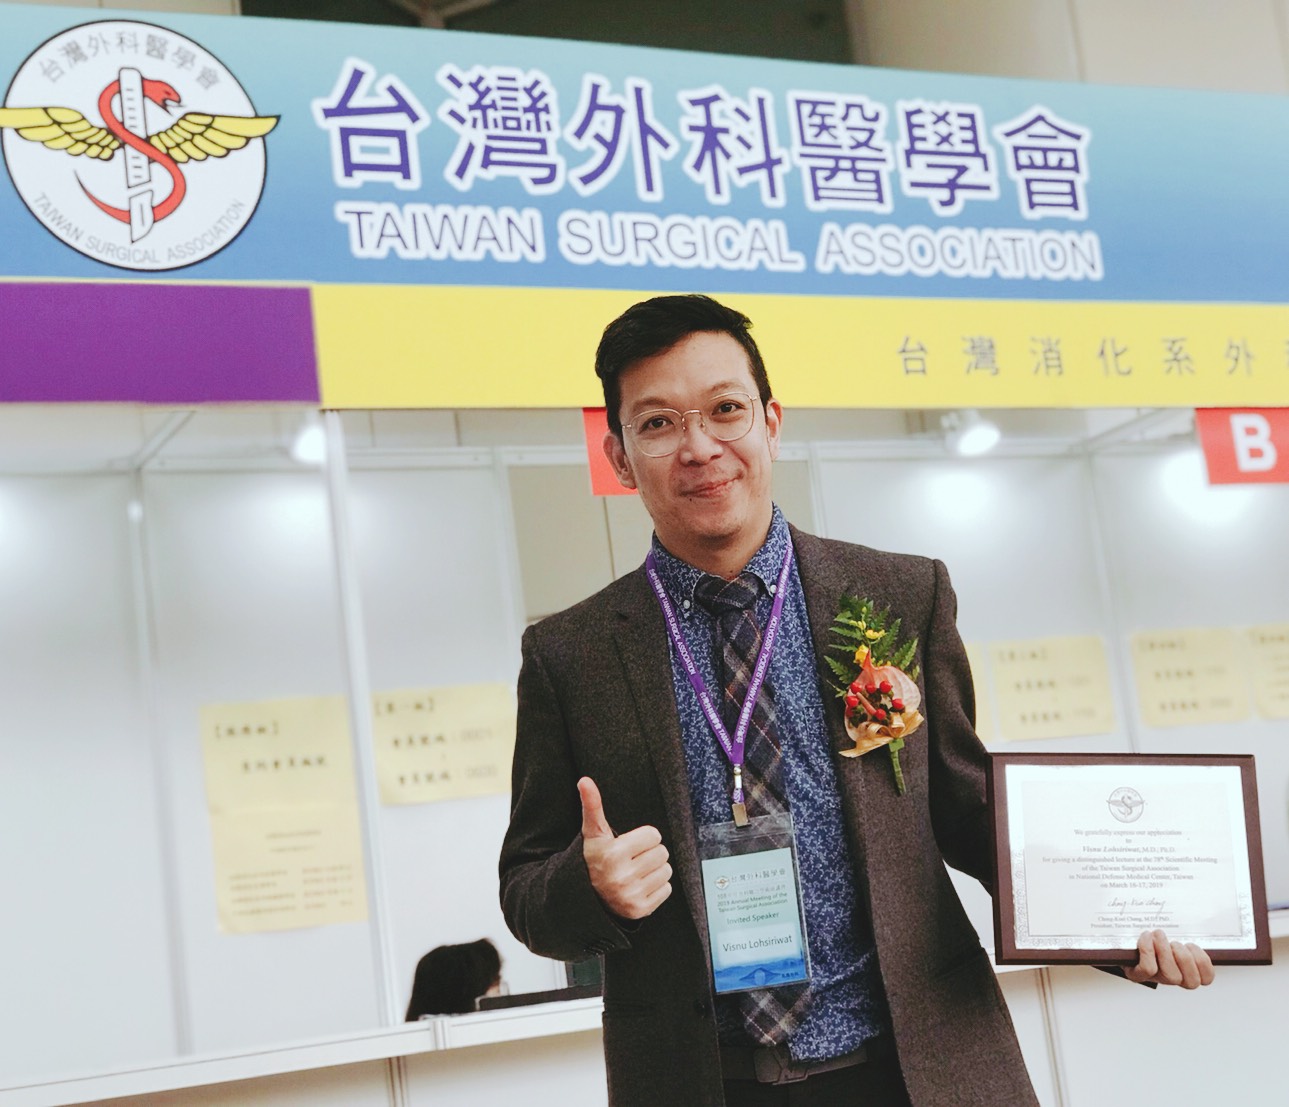 Siriraj Faculty Attended “2019 Annual Meeting of the Taiwan Surgical Association”